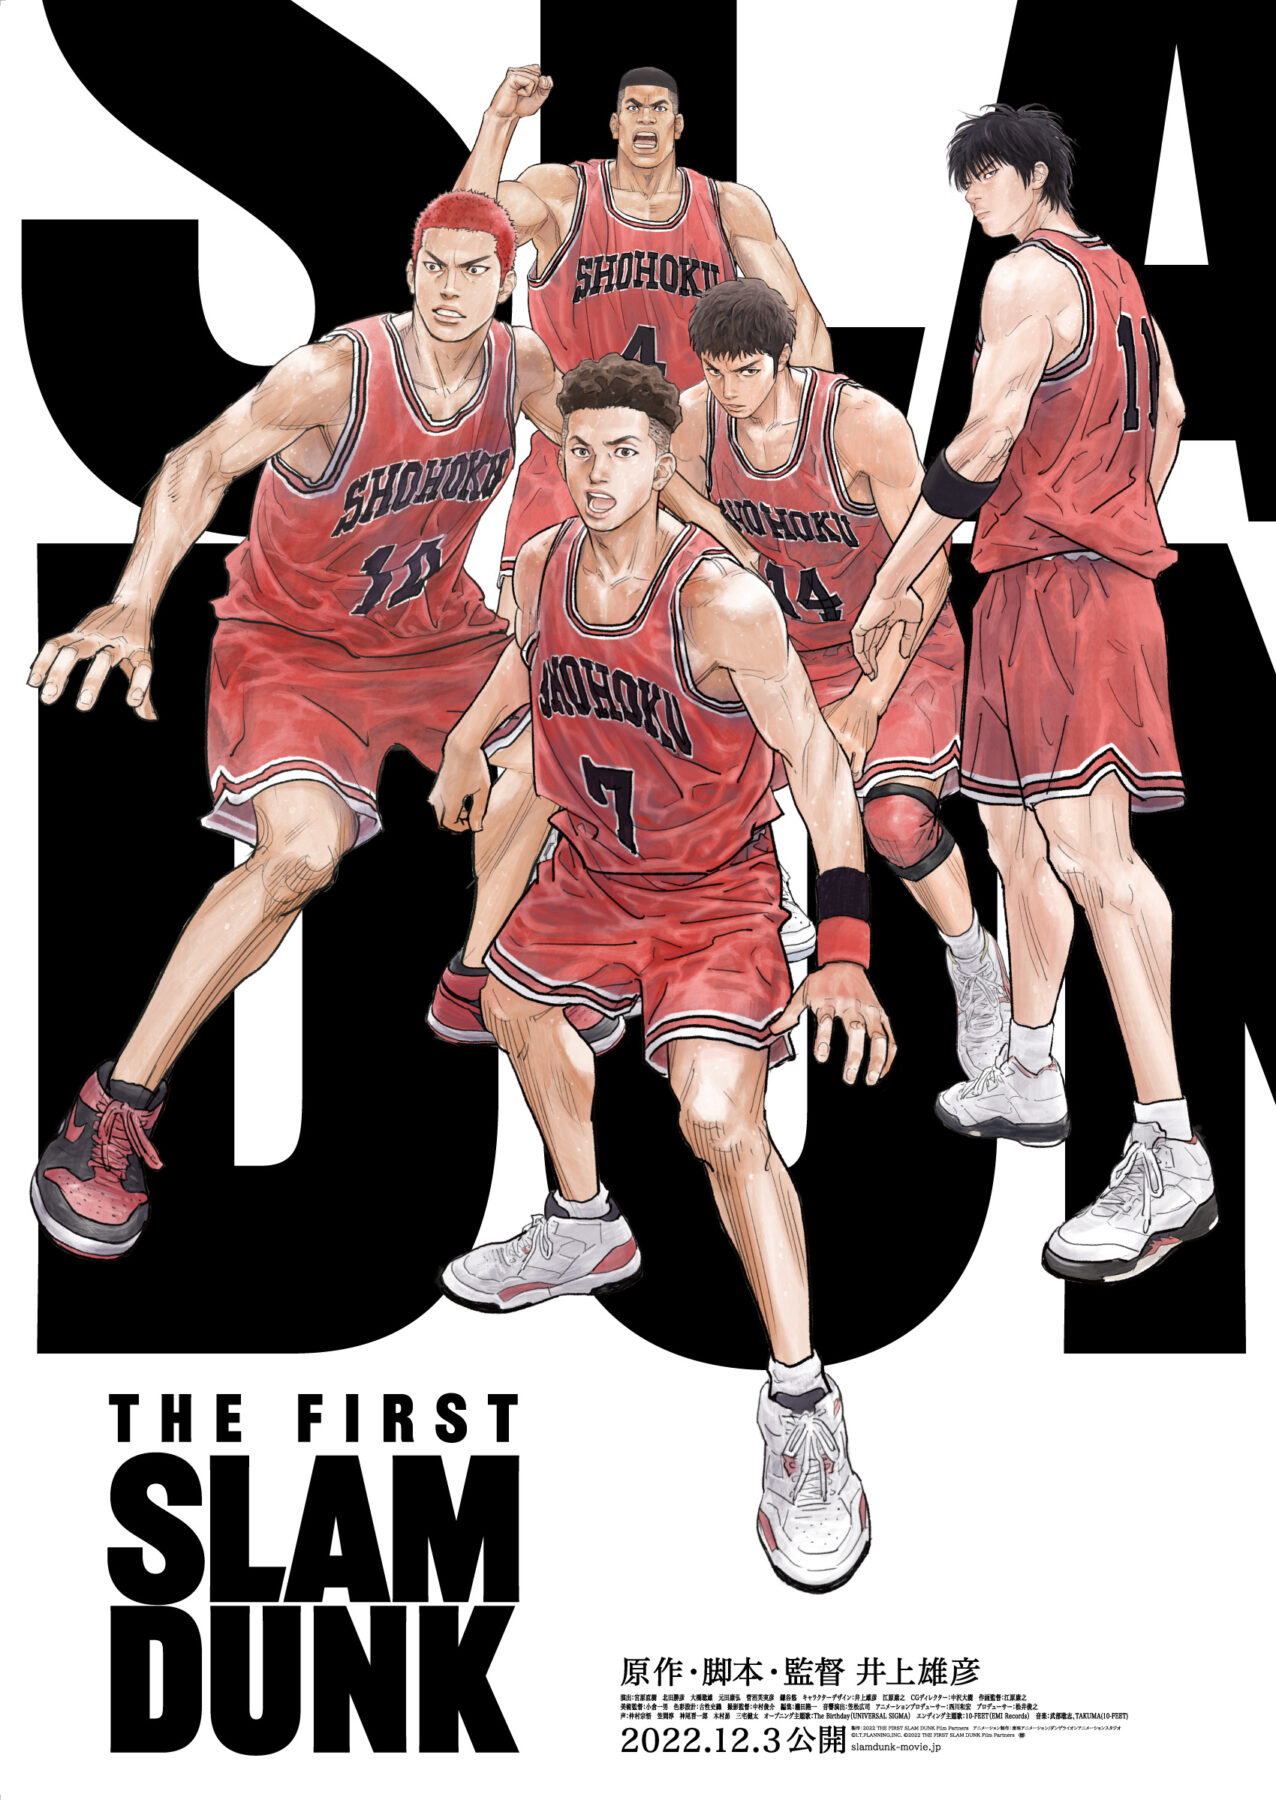 『THE FIRST SLAM DUNK』ポスター © I.T.PLANNING,INC. © 2022 THE FIRST SLAM DUNK Film Partners